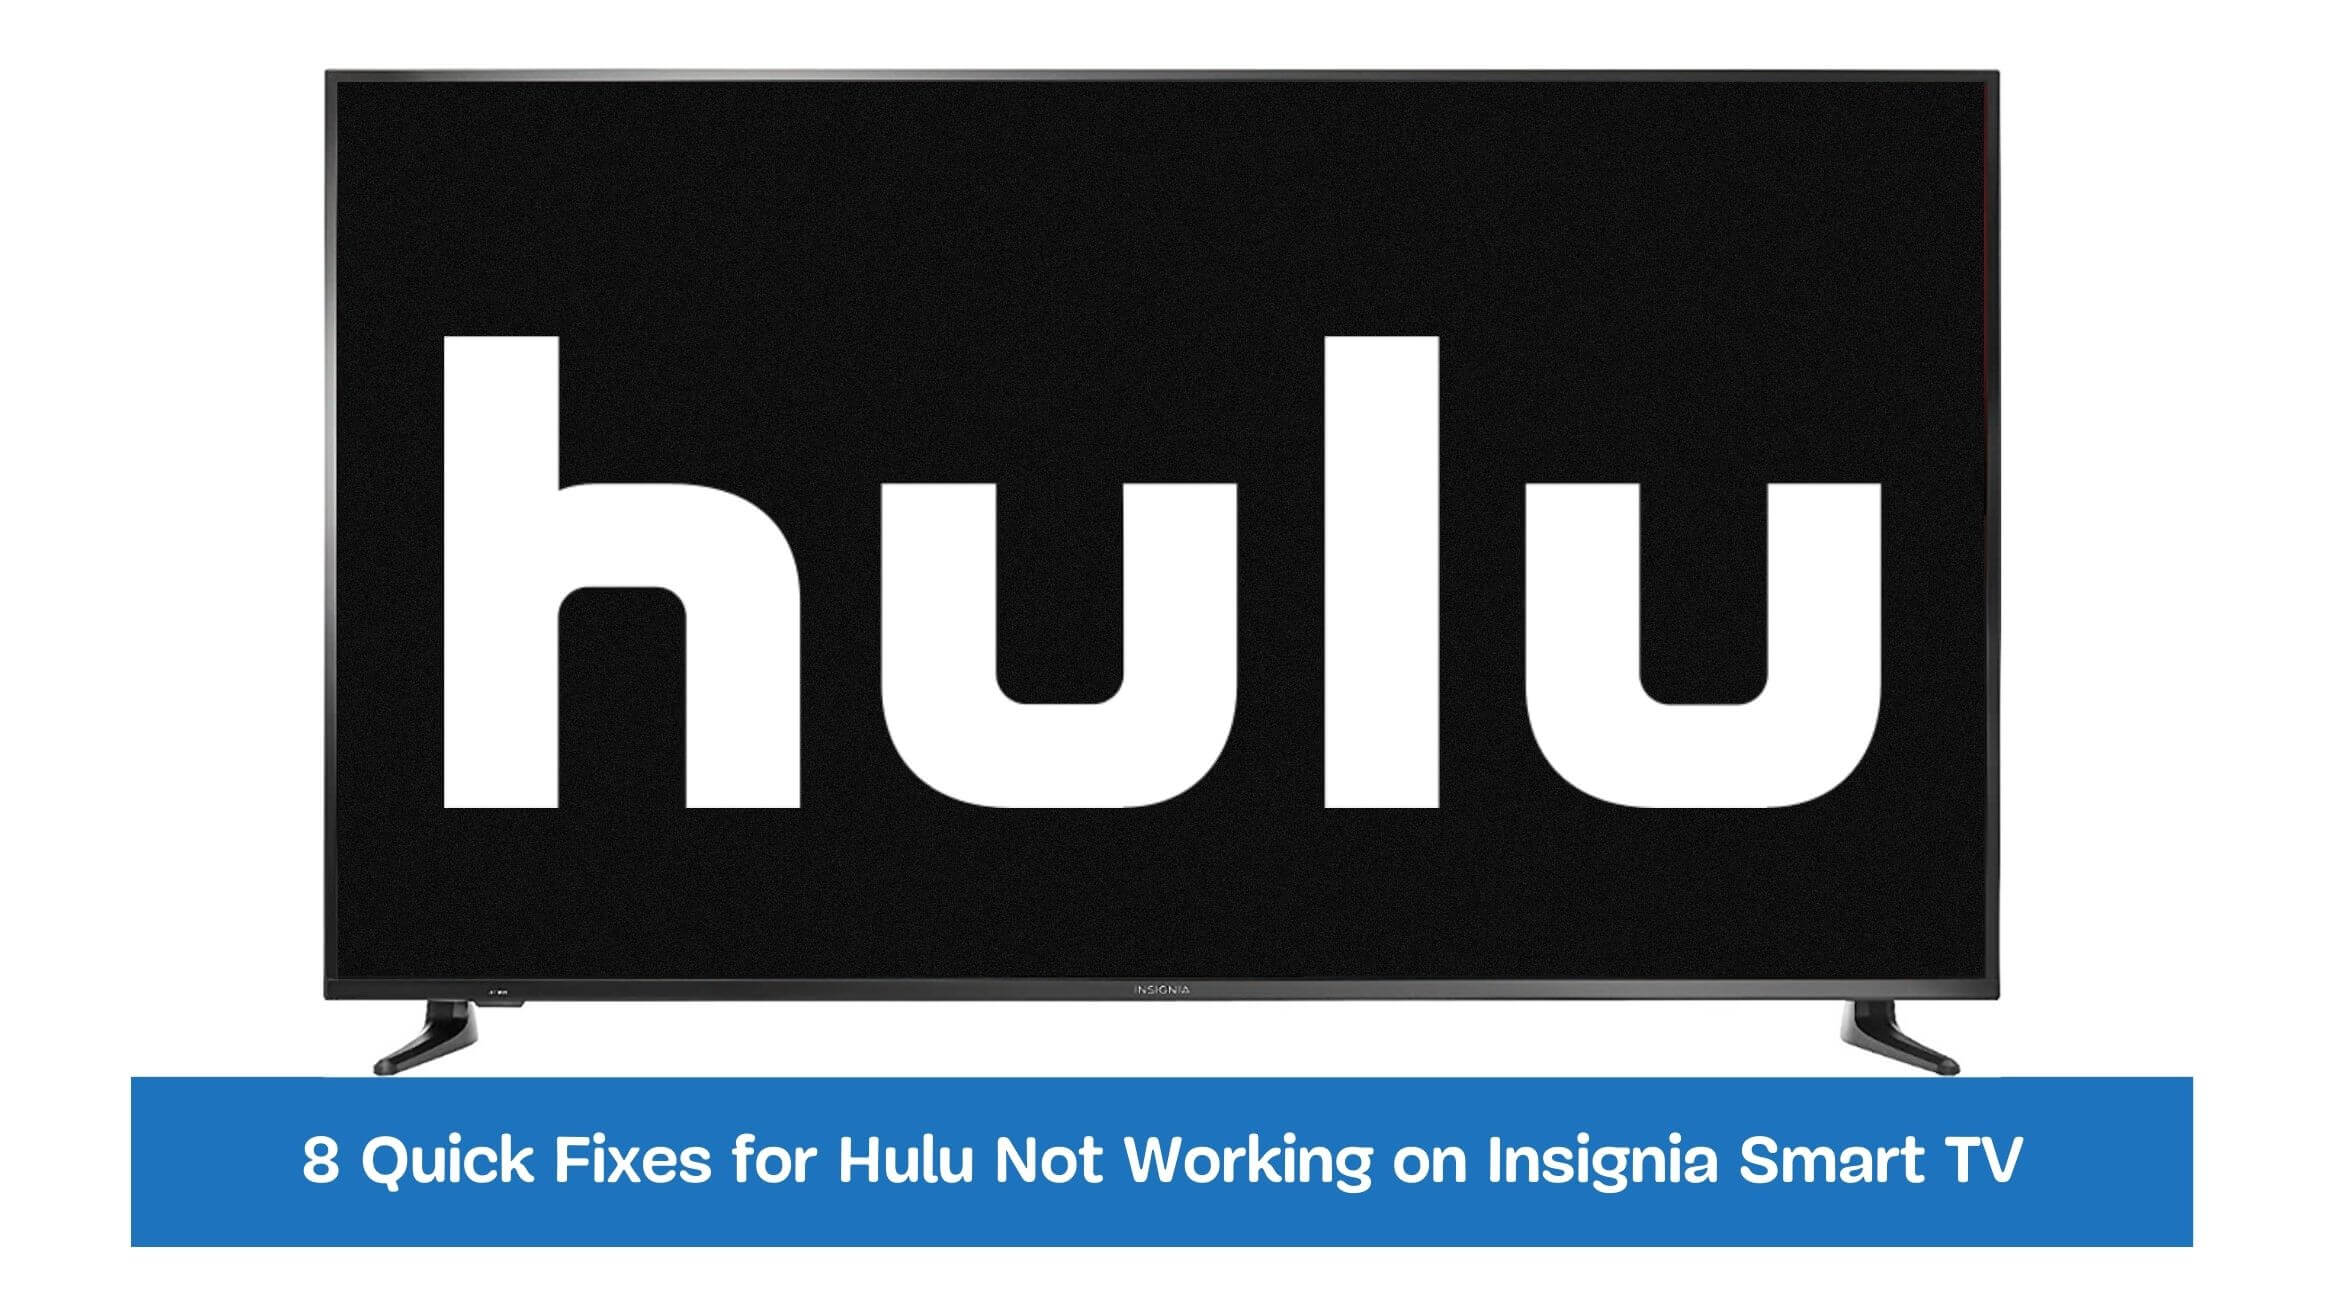 8 Quick Fixes for Hulu Not Working on Insignia Smart TV